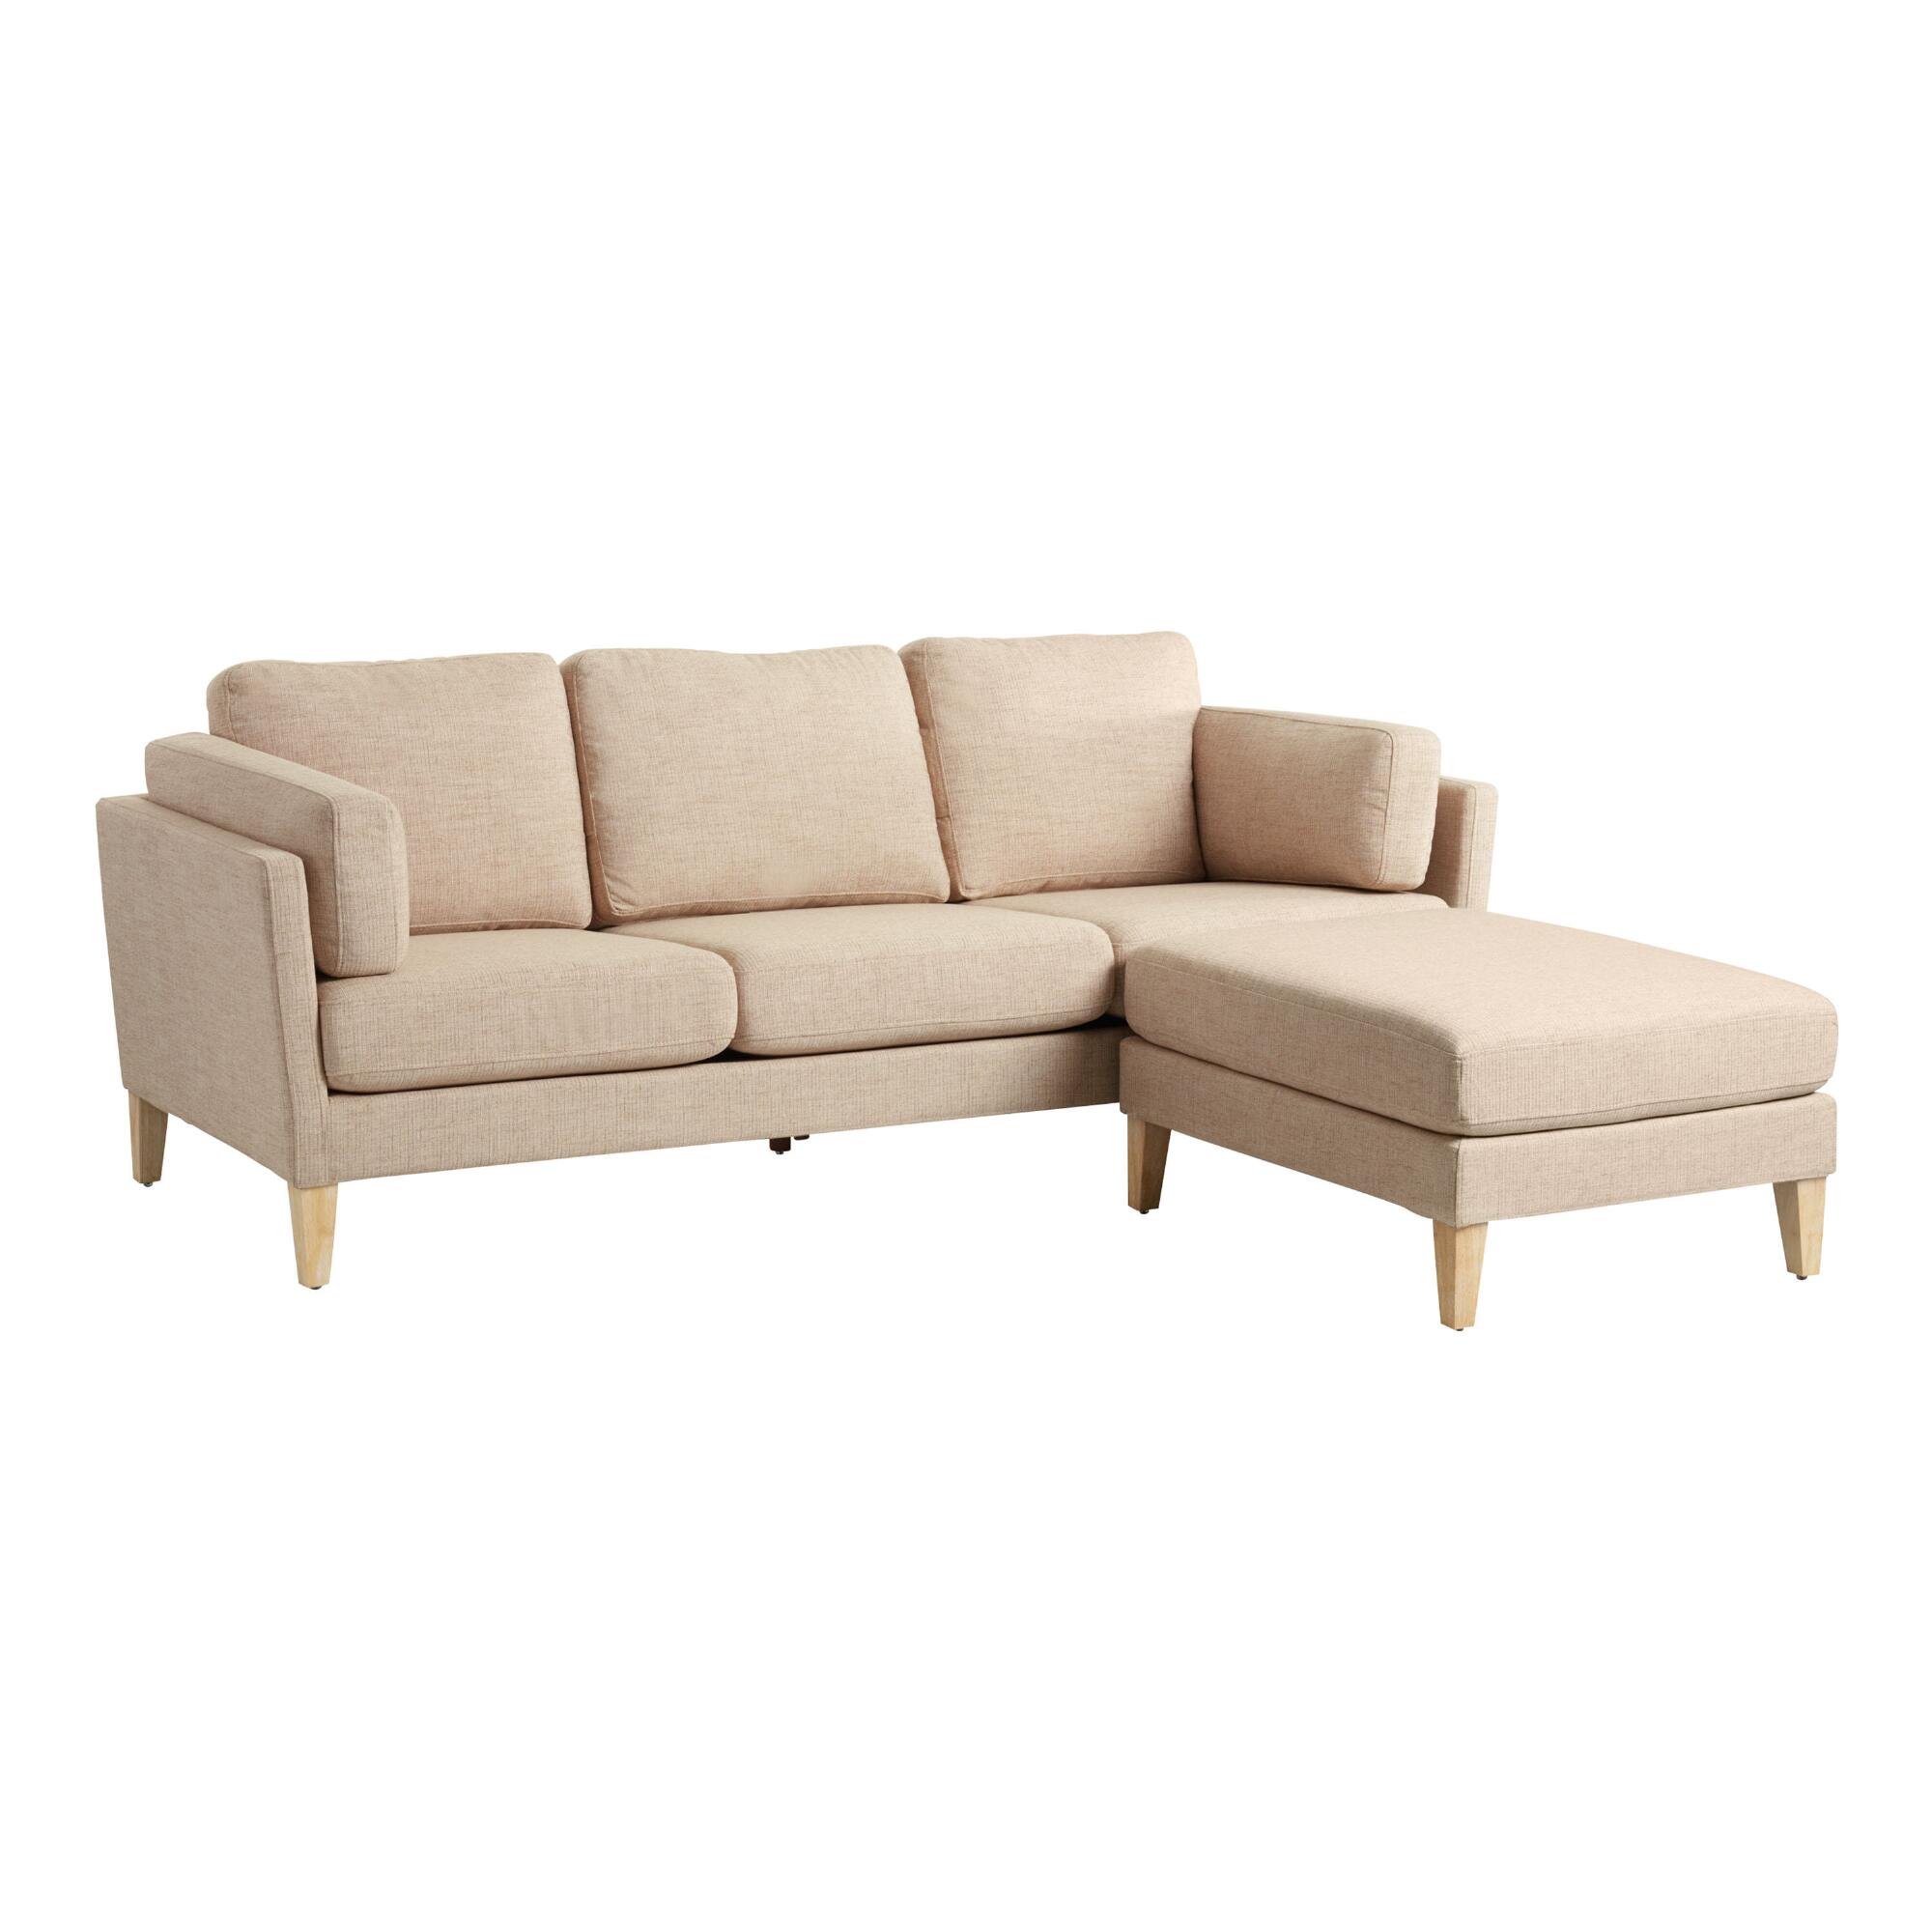 Oatmeal Woven Noelle Sofa and Ottoman: Gray/Natural - Fabric by World Market